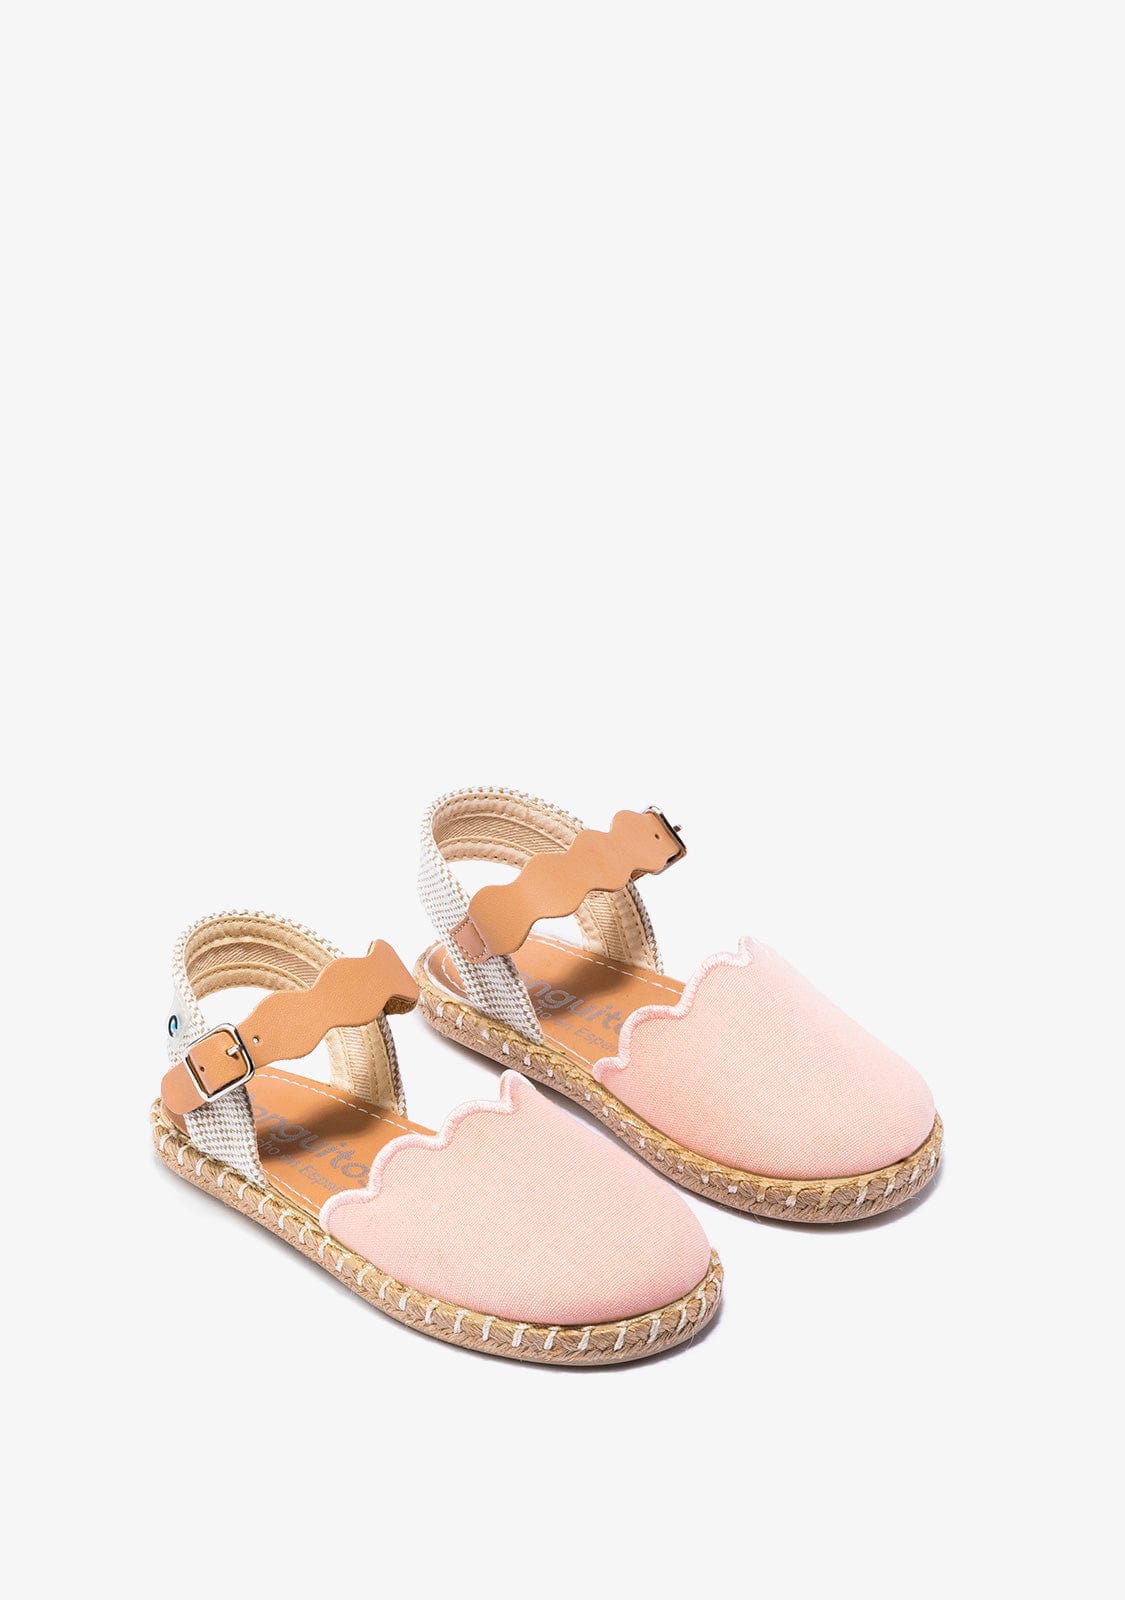 CONGUITOS Shoes Girl's Pink Buckle Espadrilles